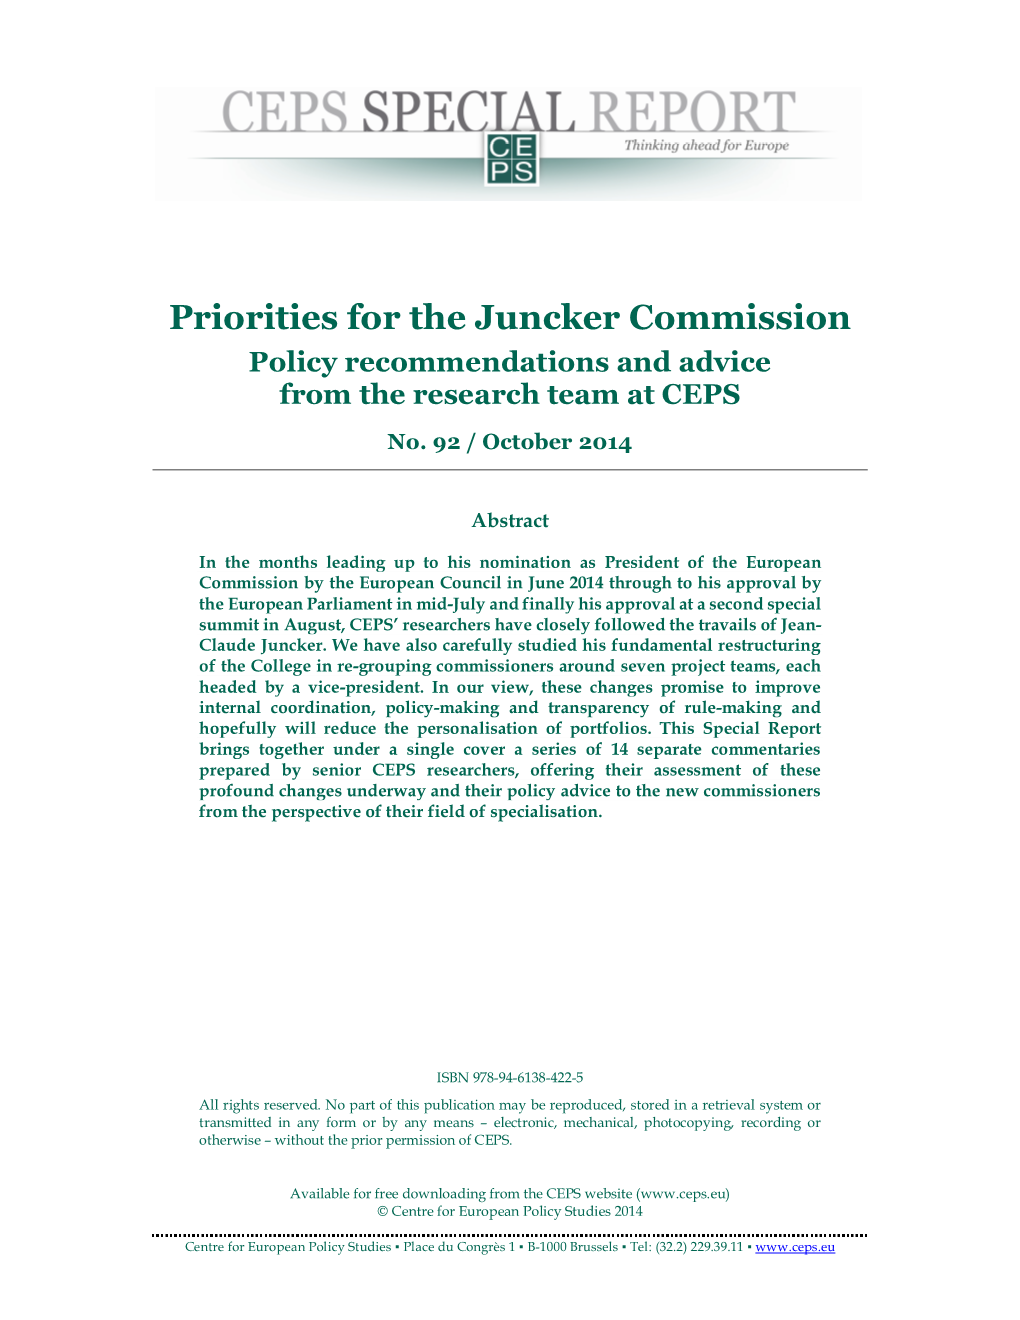 Priorities for the Juncker Commission Policy Recommendations and Advice from the Research Team at CEPS No